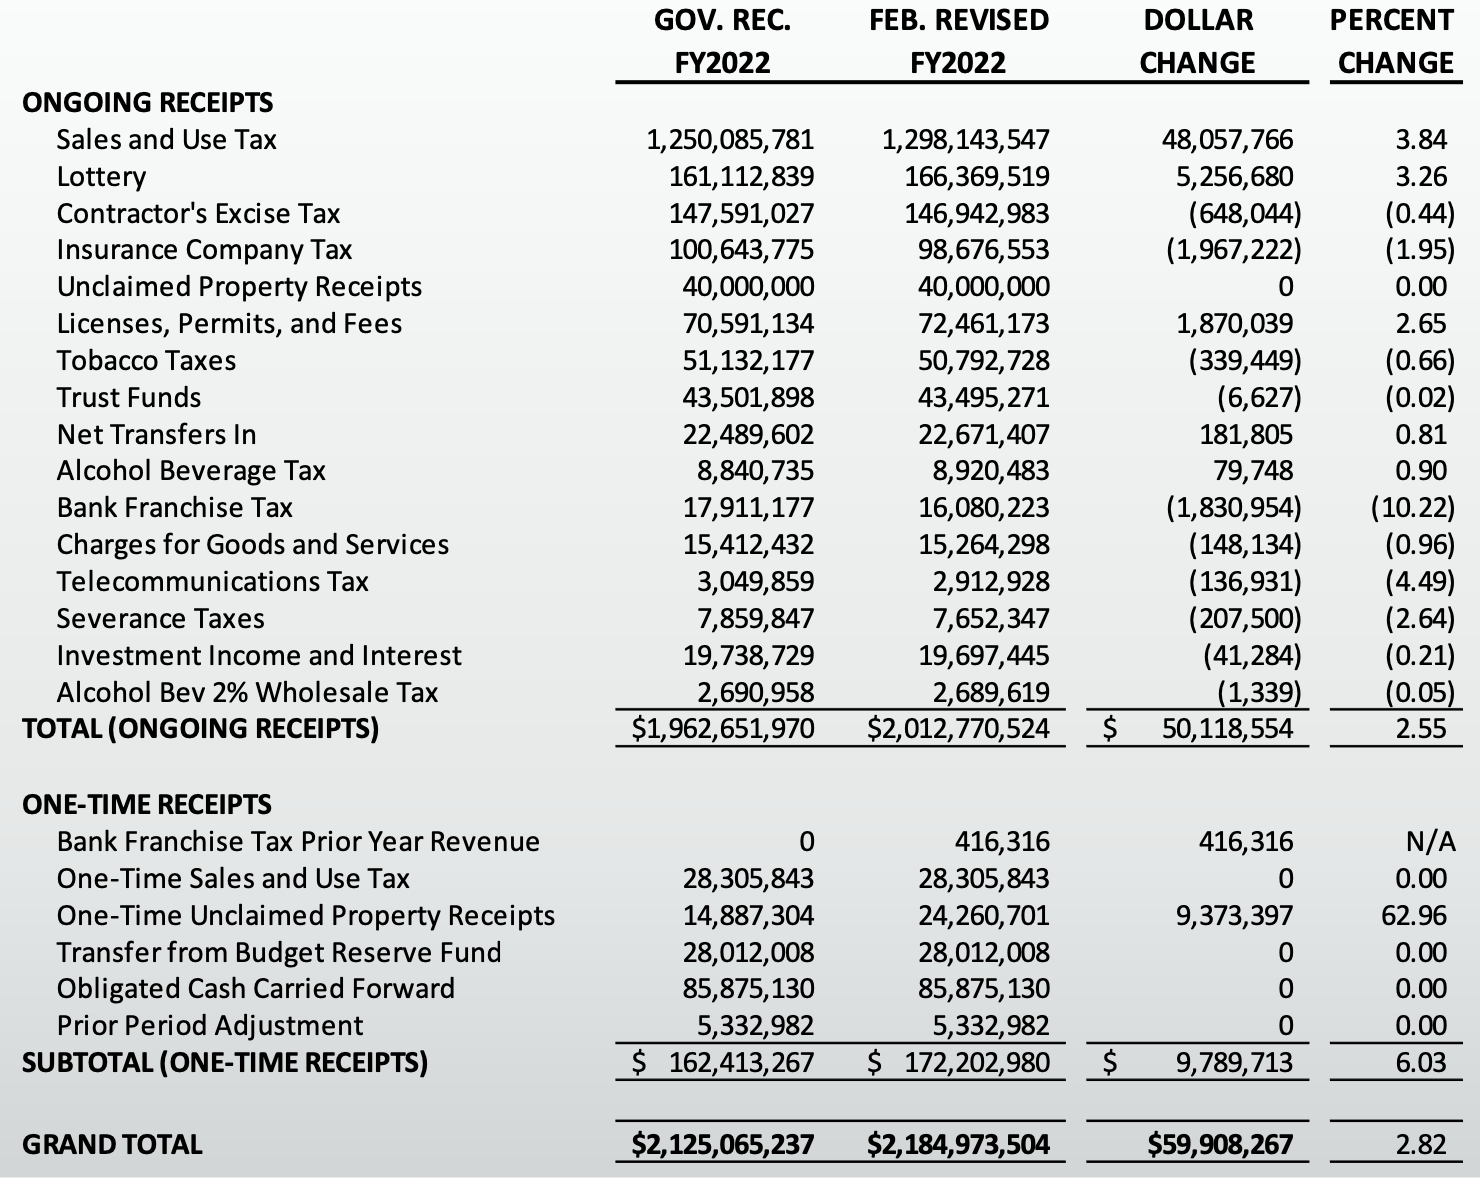 BFM, revised revenue projections for FY2022 vs. Governor's earlier recommendation, presentation to Joint Appropriations, 2022.02.14.